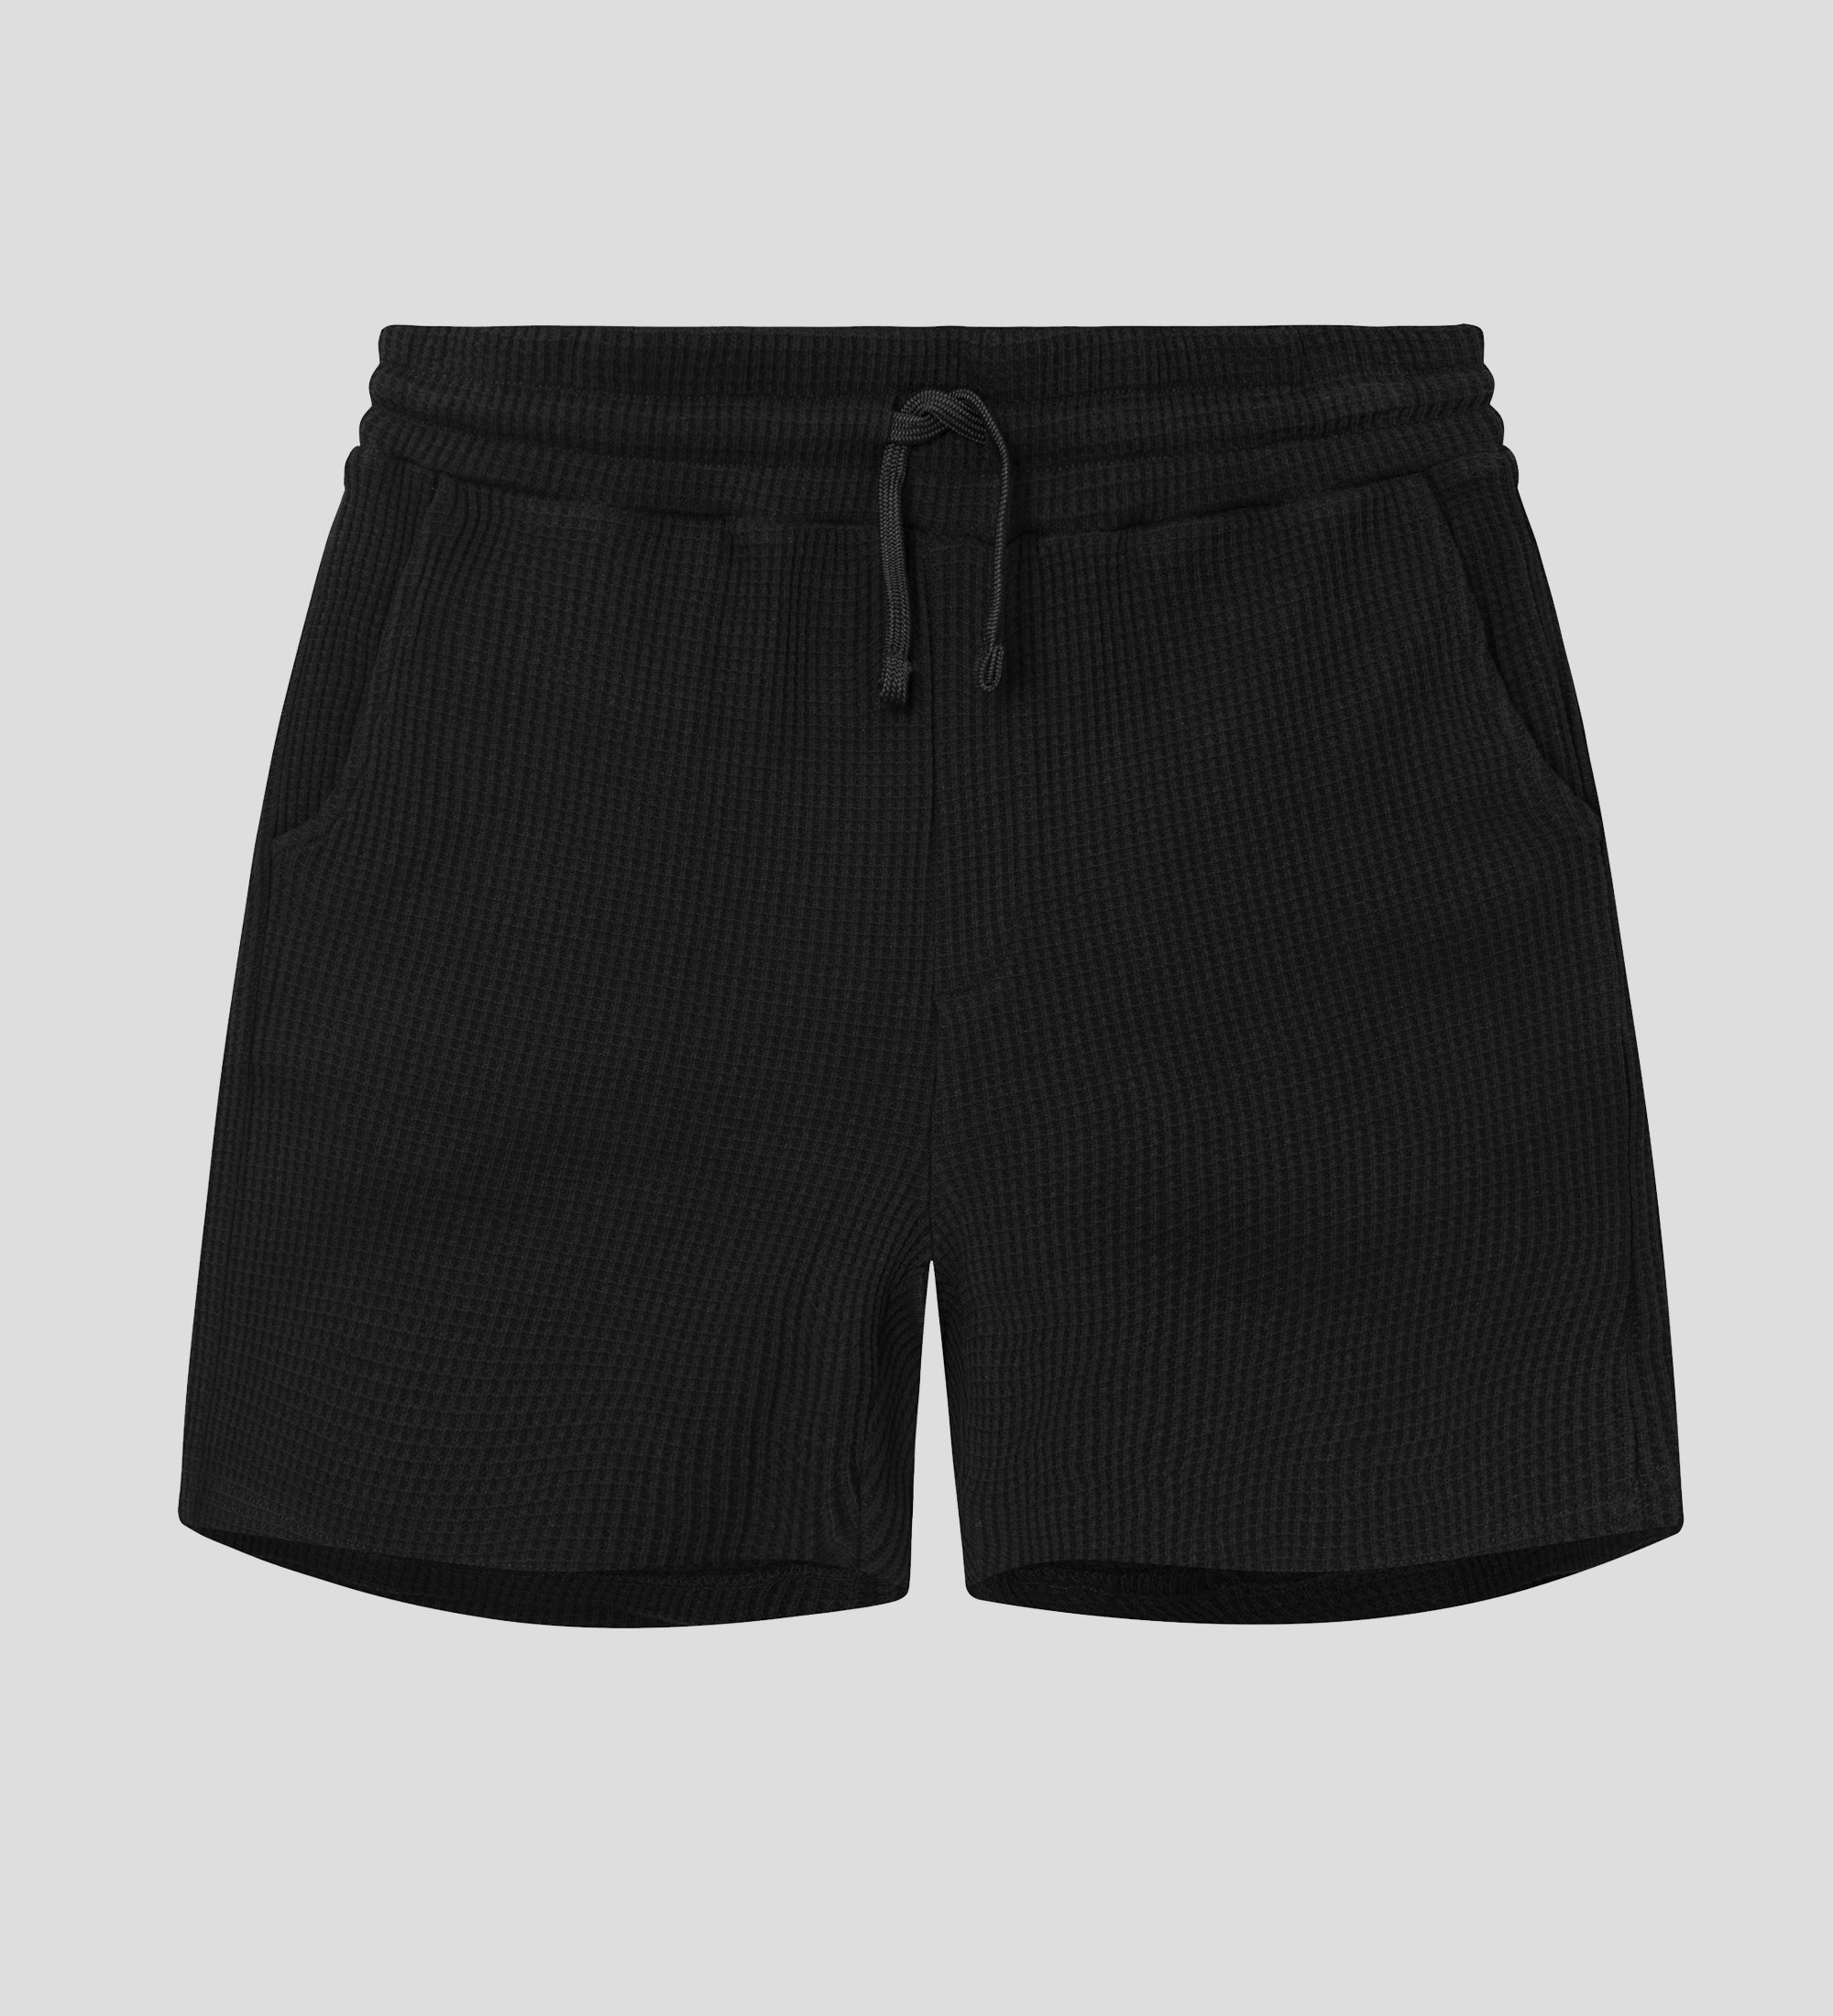 Black mid length shorts with drawstring and two side pockets